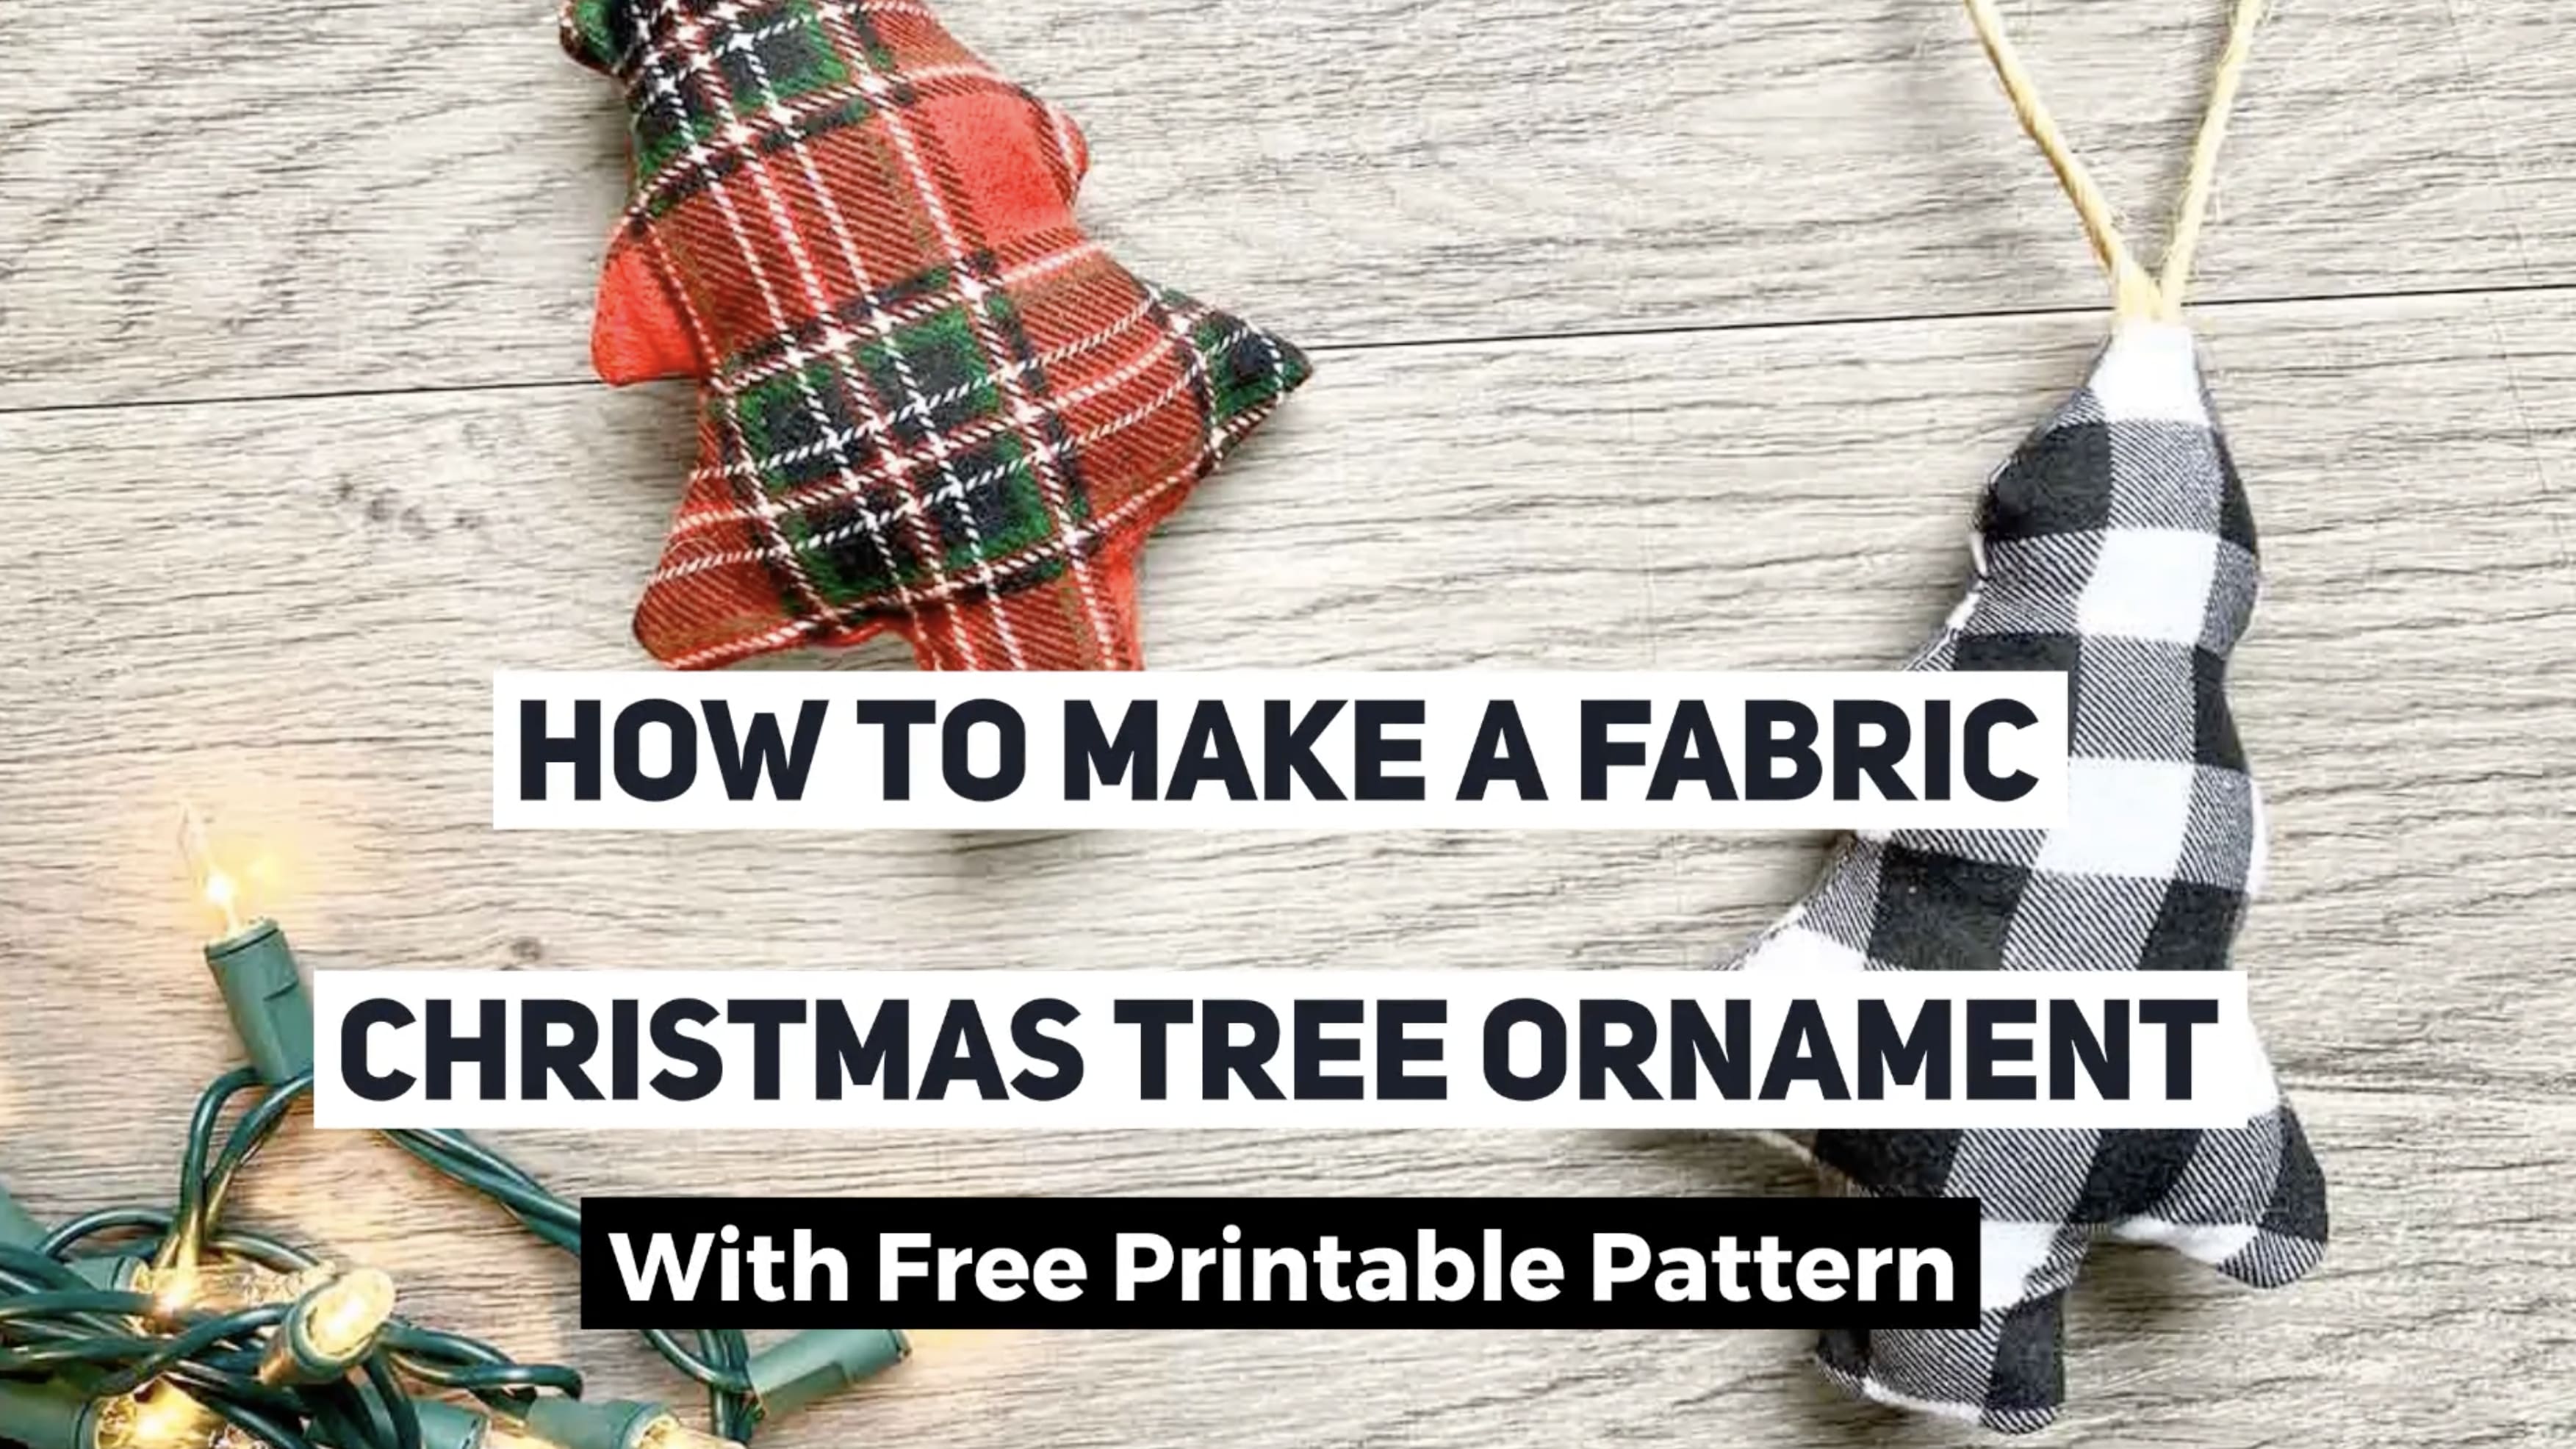 How To Make A Fabric Christmas Tree Ornament With Free Printable Pattern